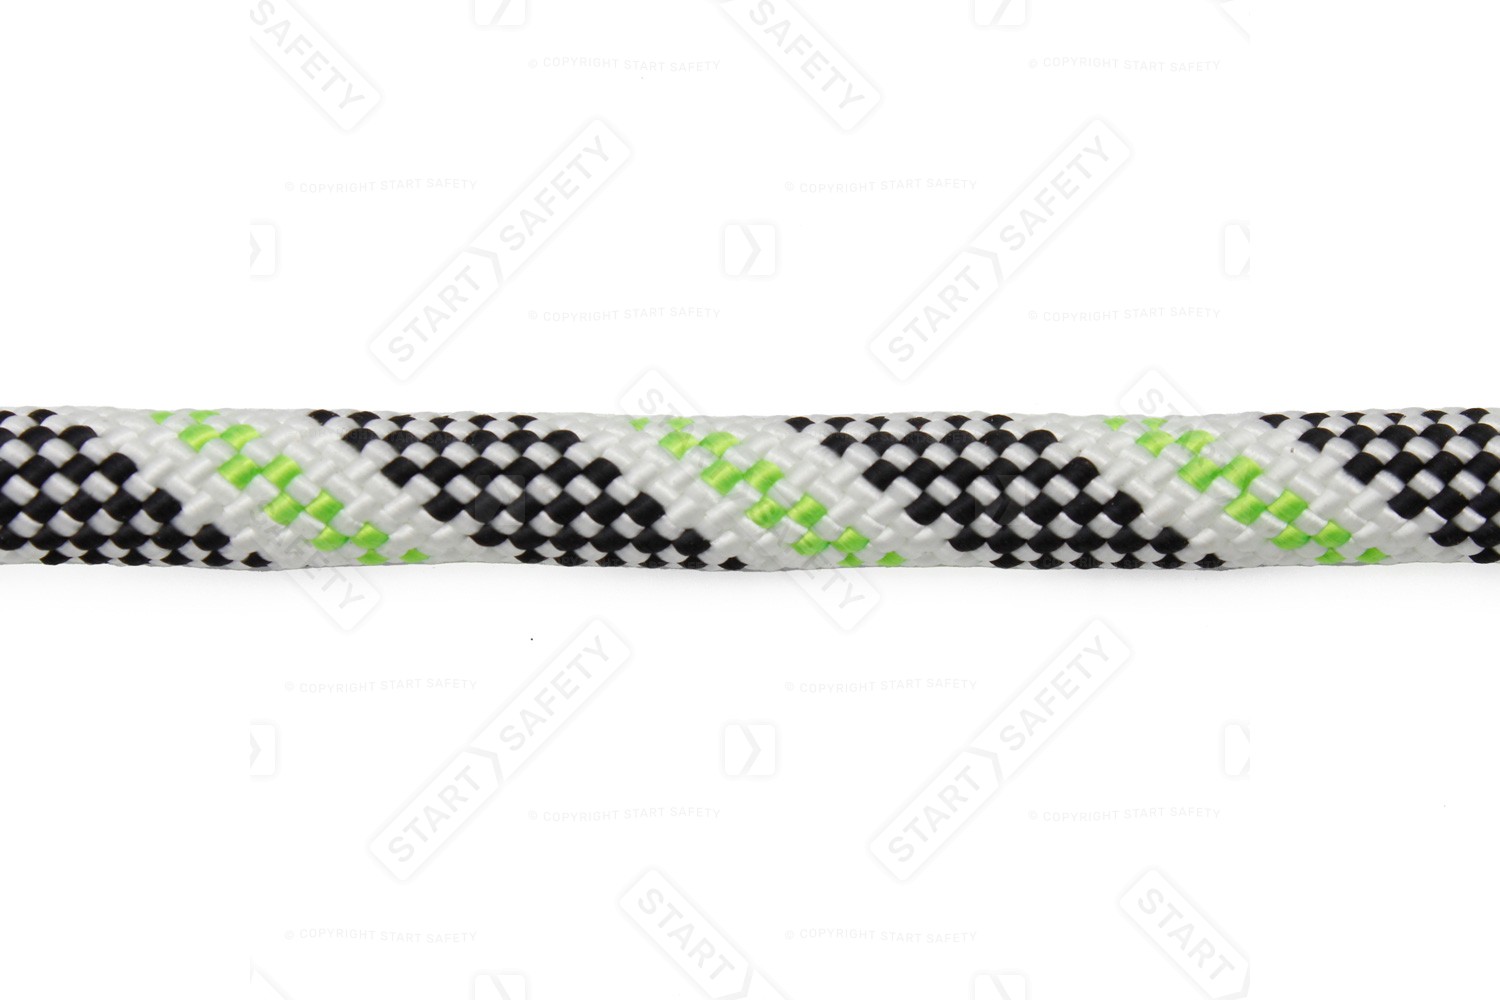 11mm Fall Arrest Rope For Sharp Edges